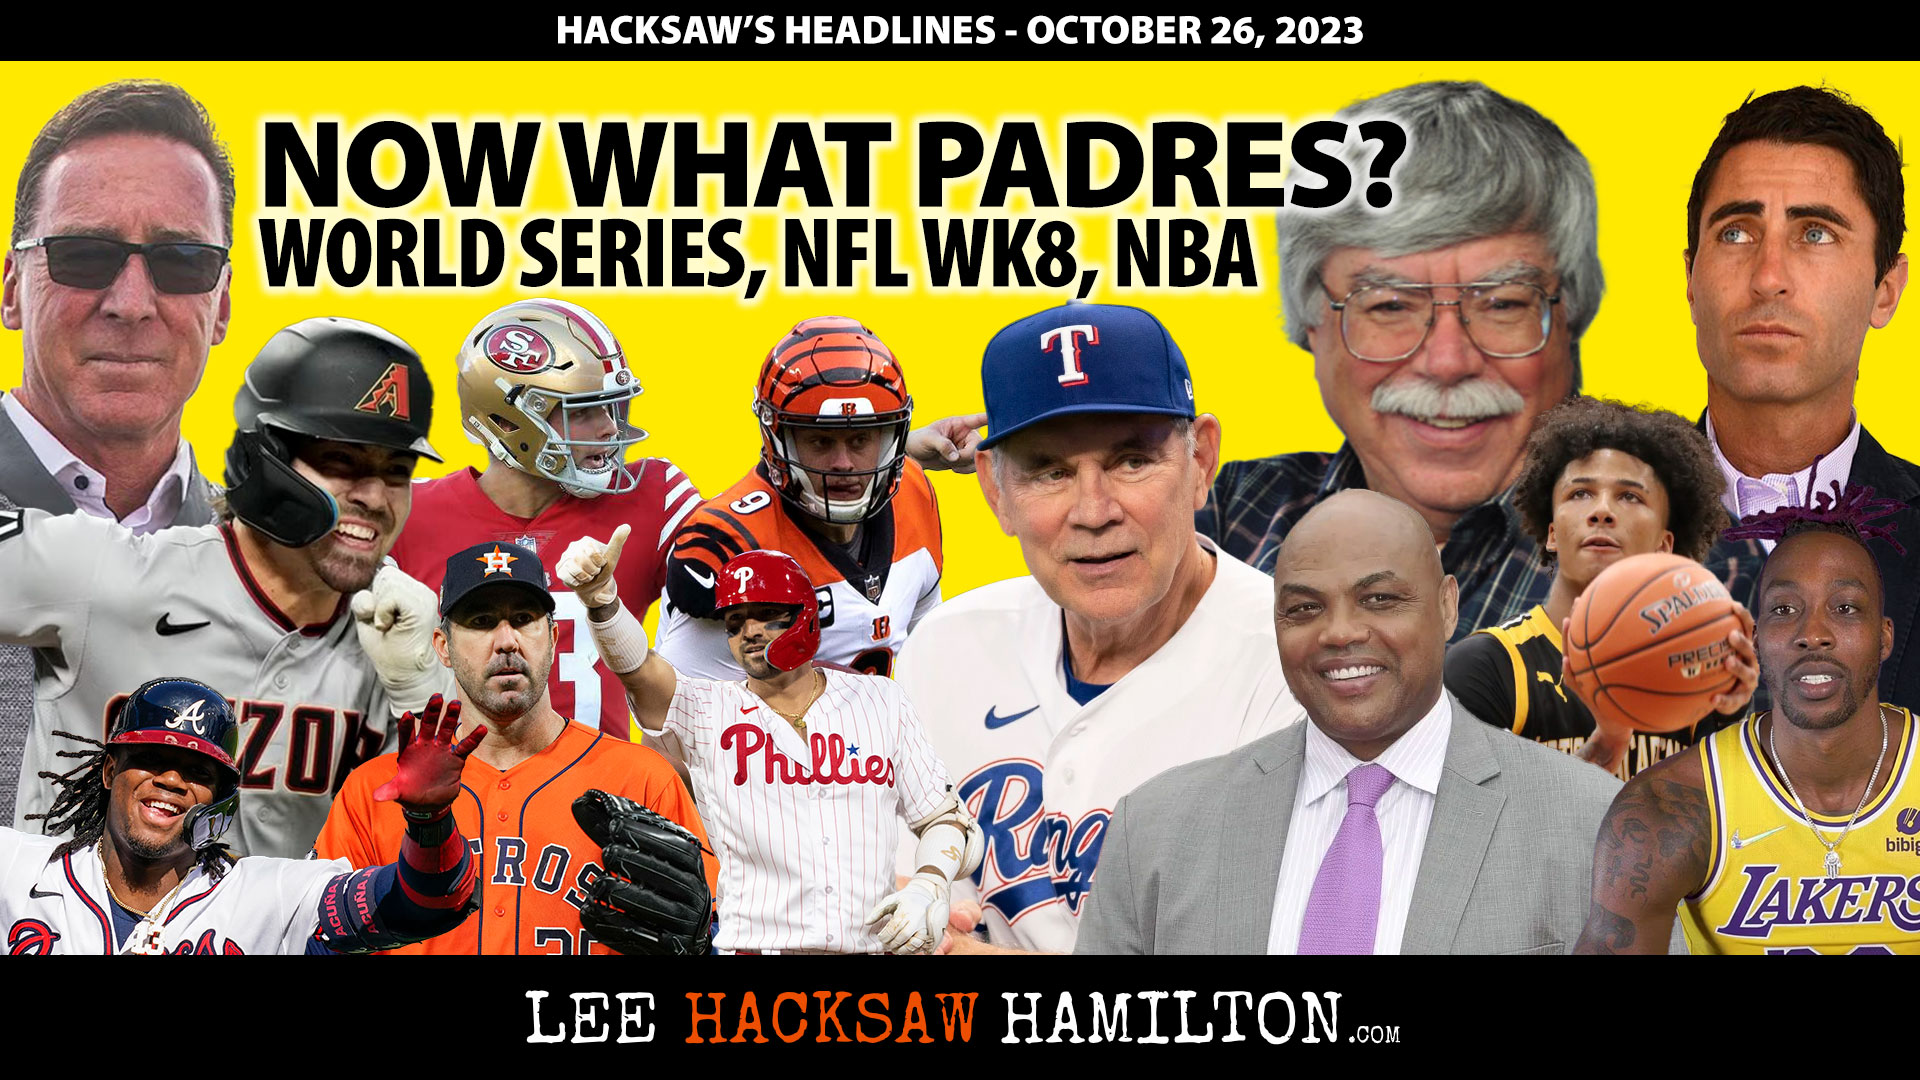 Lee Hacksaw Hamilton discusses Padres Manager Search, AJ Preller, World Series, NFL Notebook, NBA, Charles Barkley